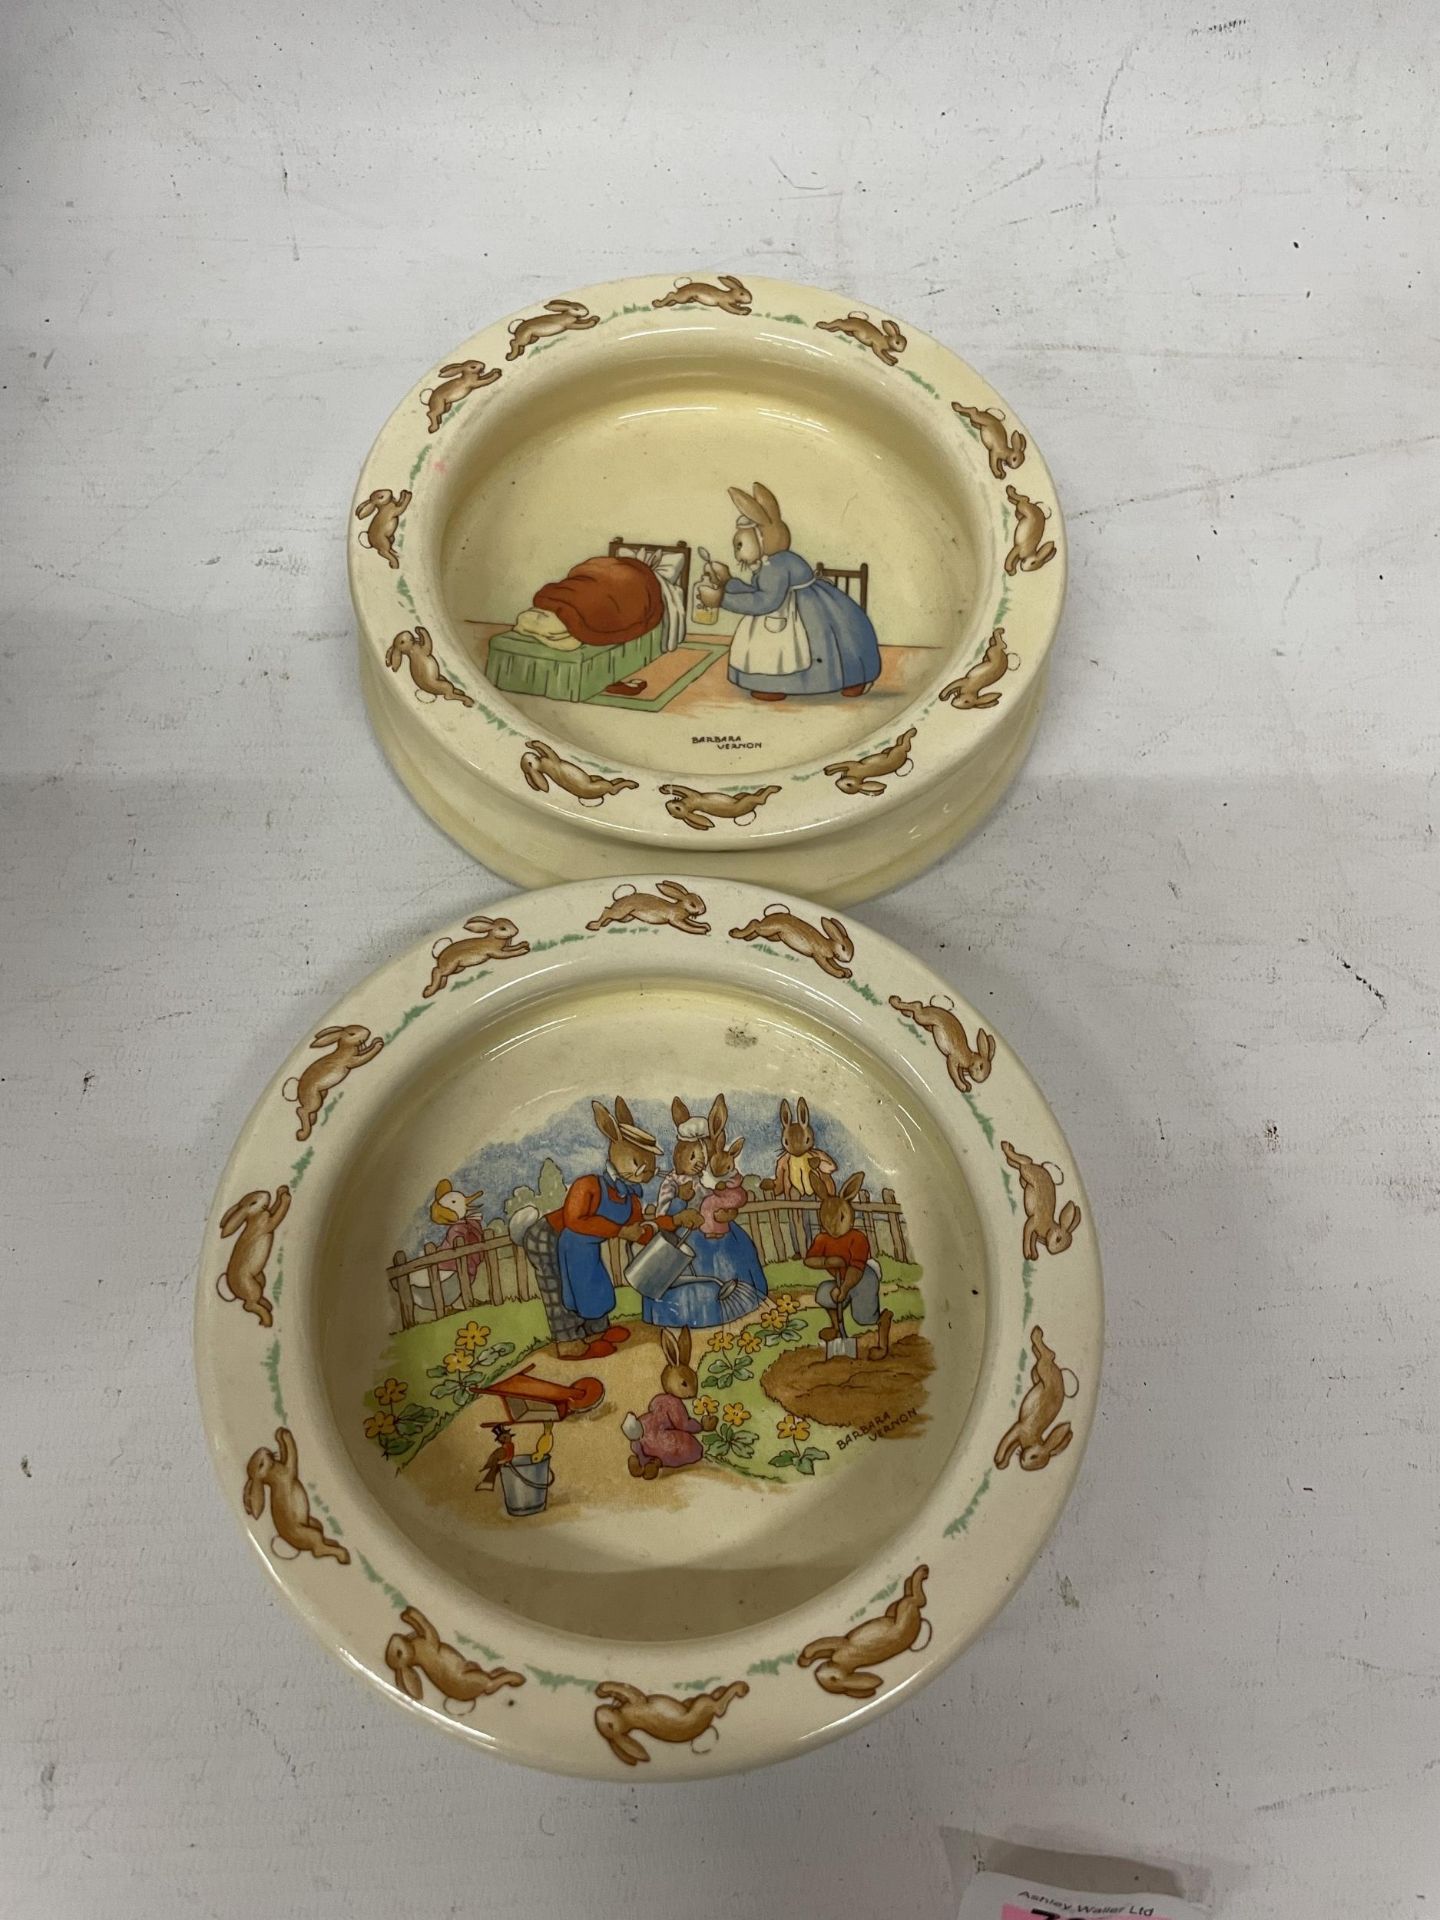 TWO ROYAL DOULTON BUNNYKINS DEEP IVORY GLAZED EARTHENWARE BABY PLATES "MEDICINE TIME" PRODUCED UNTIL